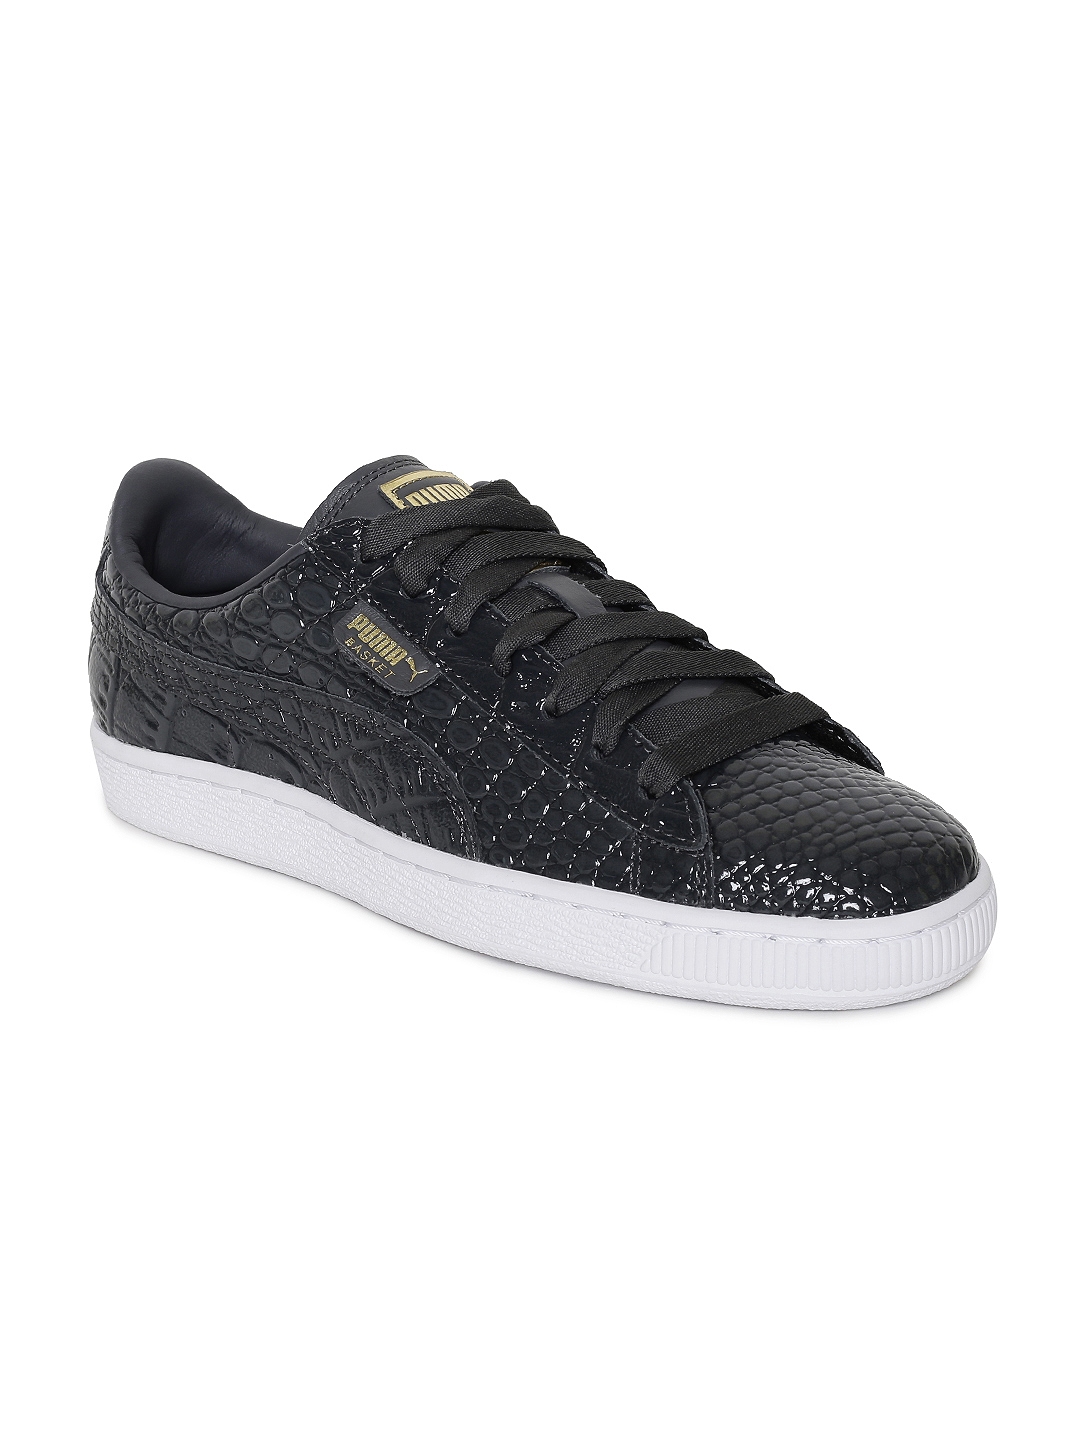 Buy Puma Women Black Textured Basket Exotic Lux Leather Sneakers - Casual  Shoes for Women 7188898 | Myntra